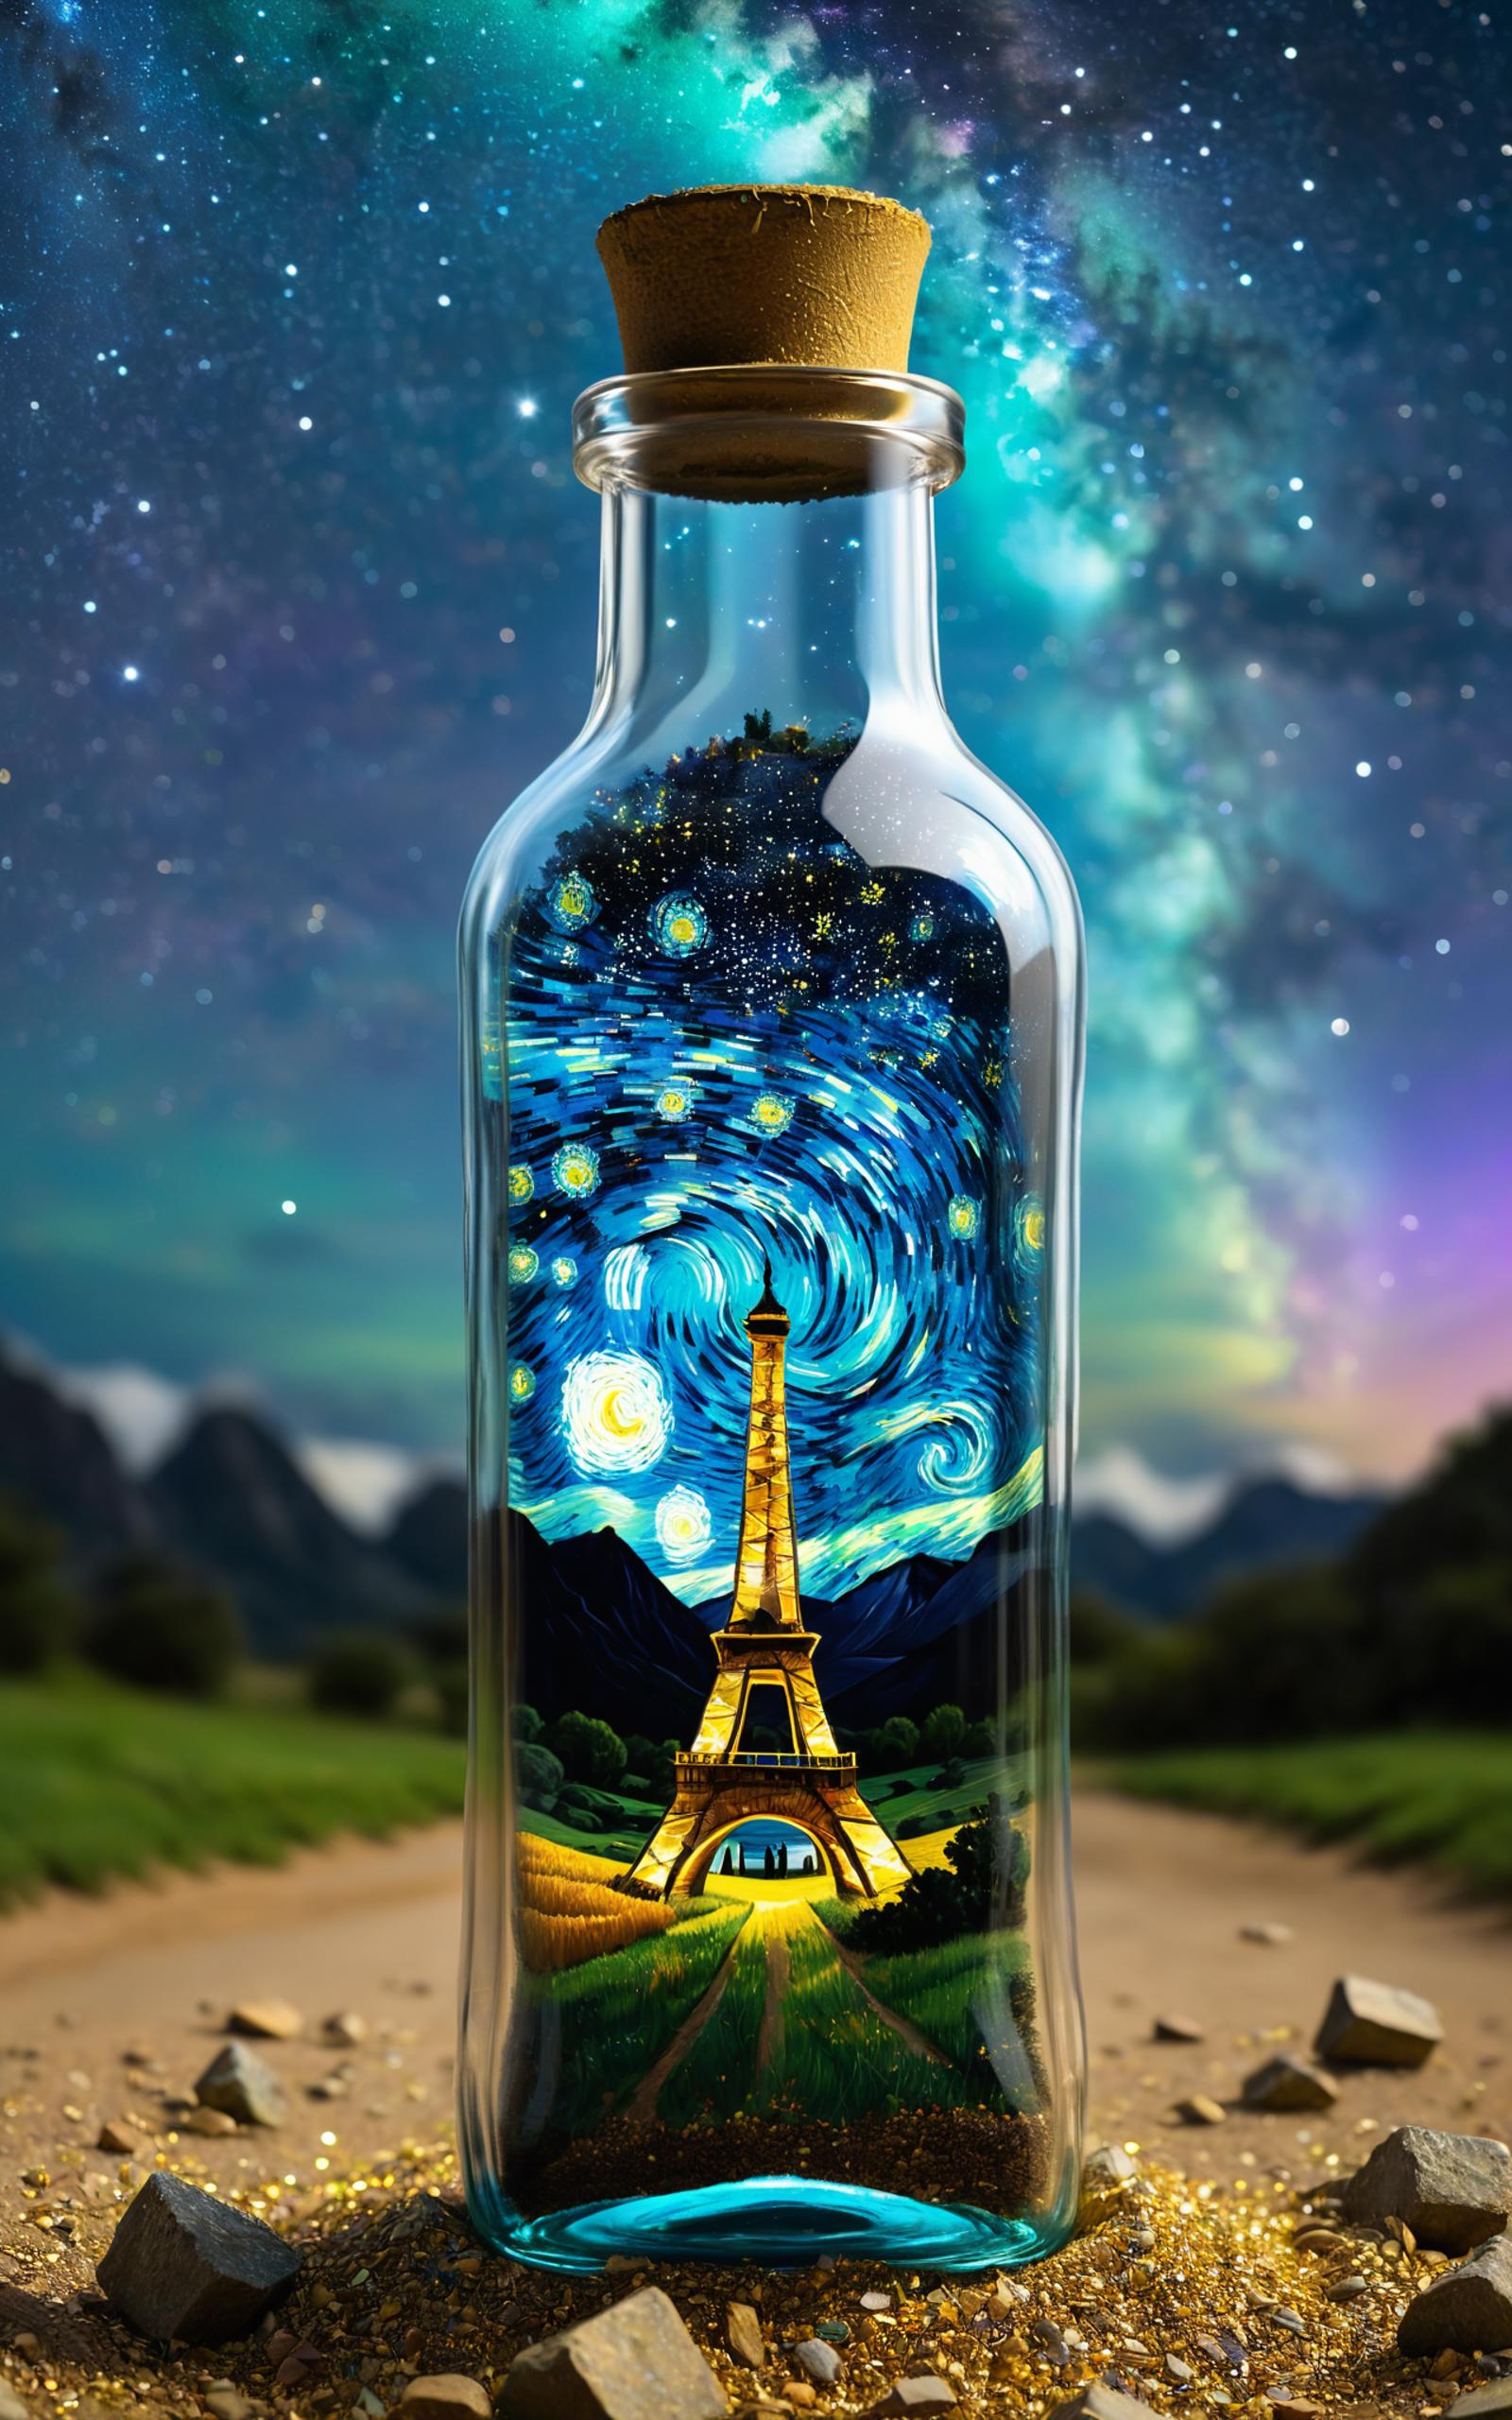 A bottle of wine with a picture of the Eiffel Tower and stars on it.